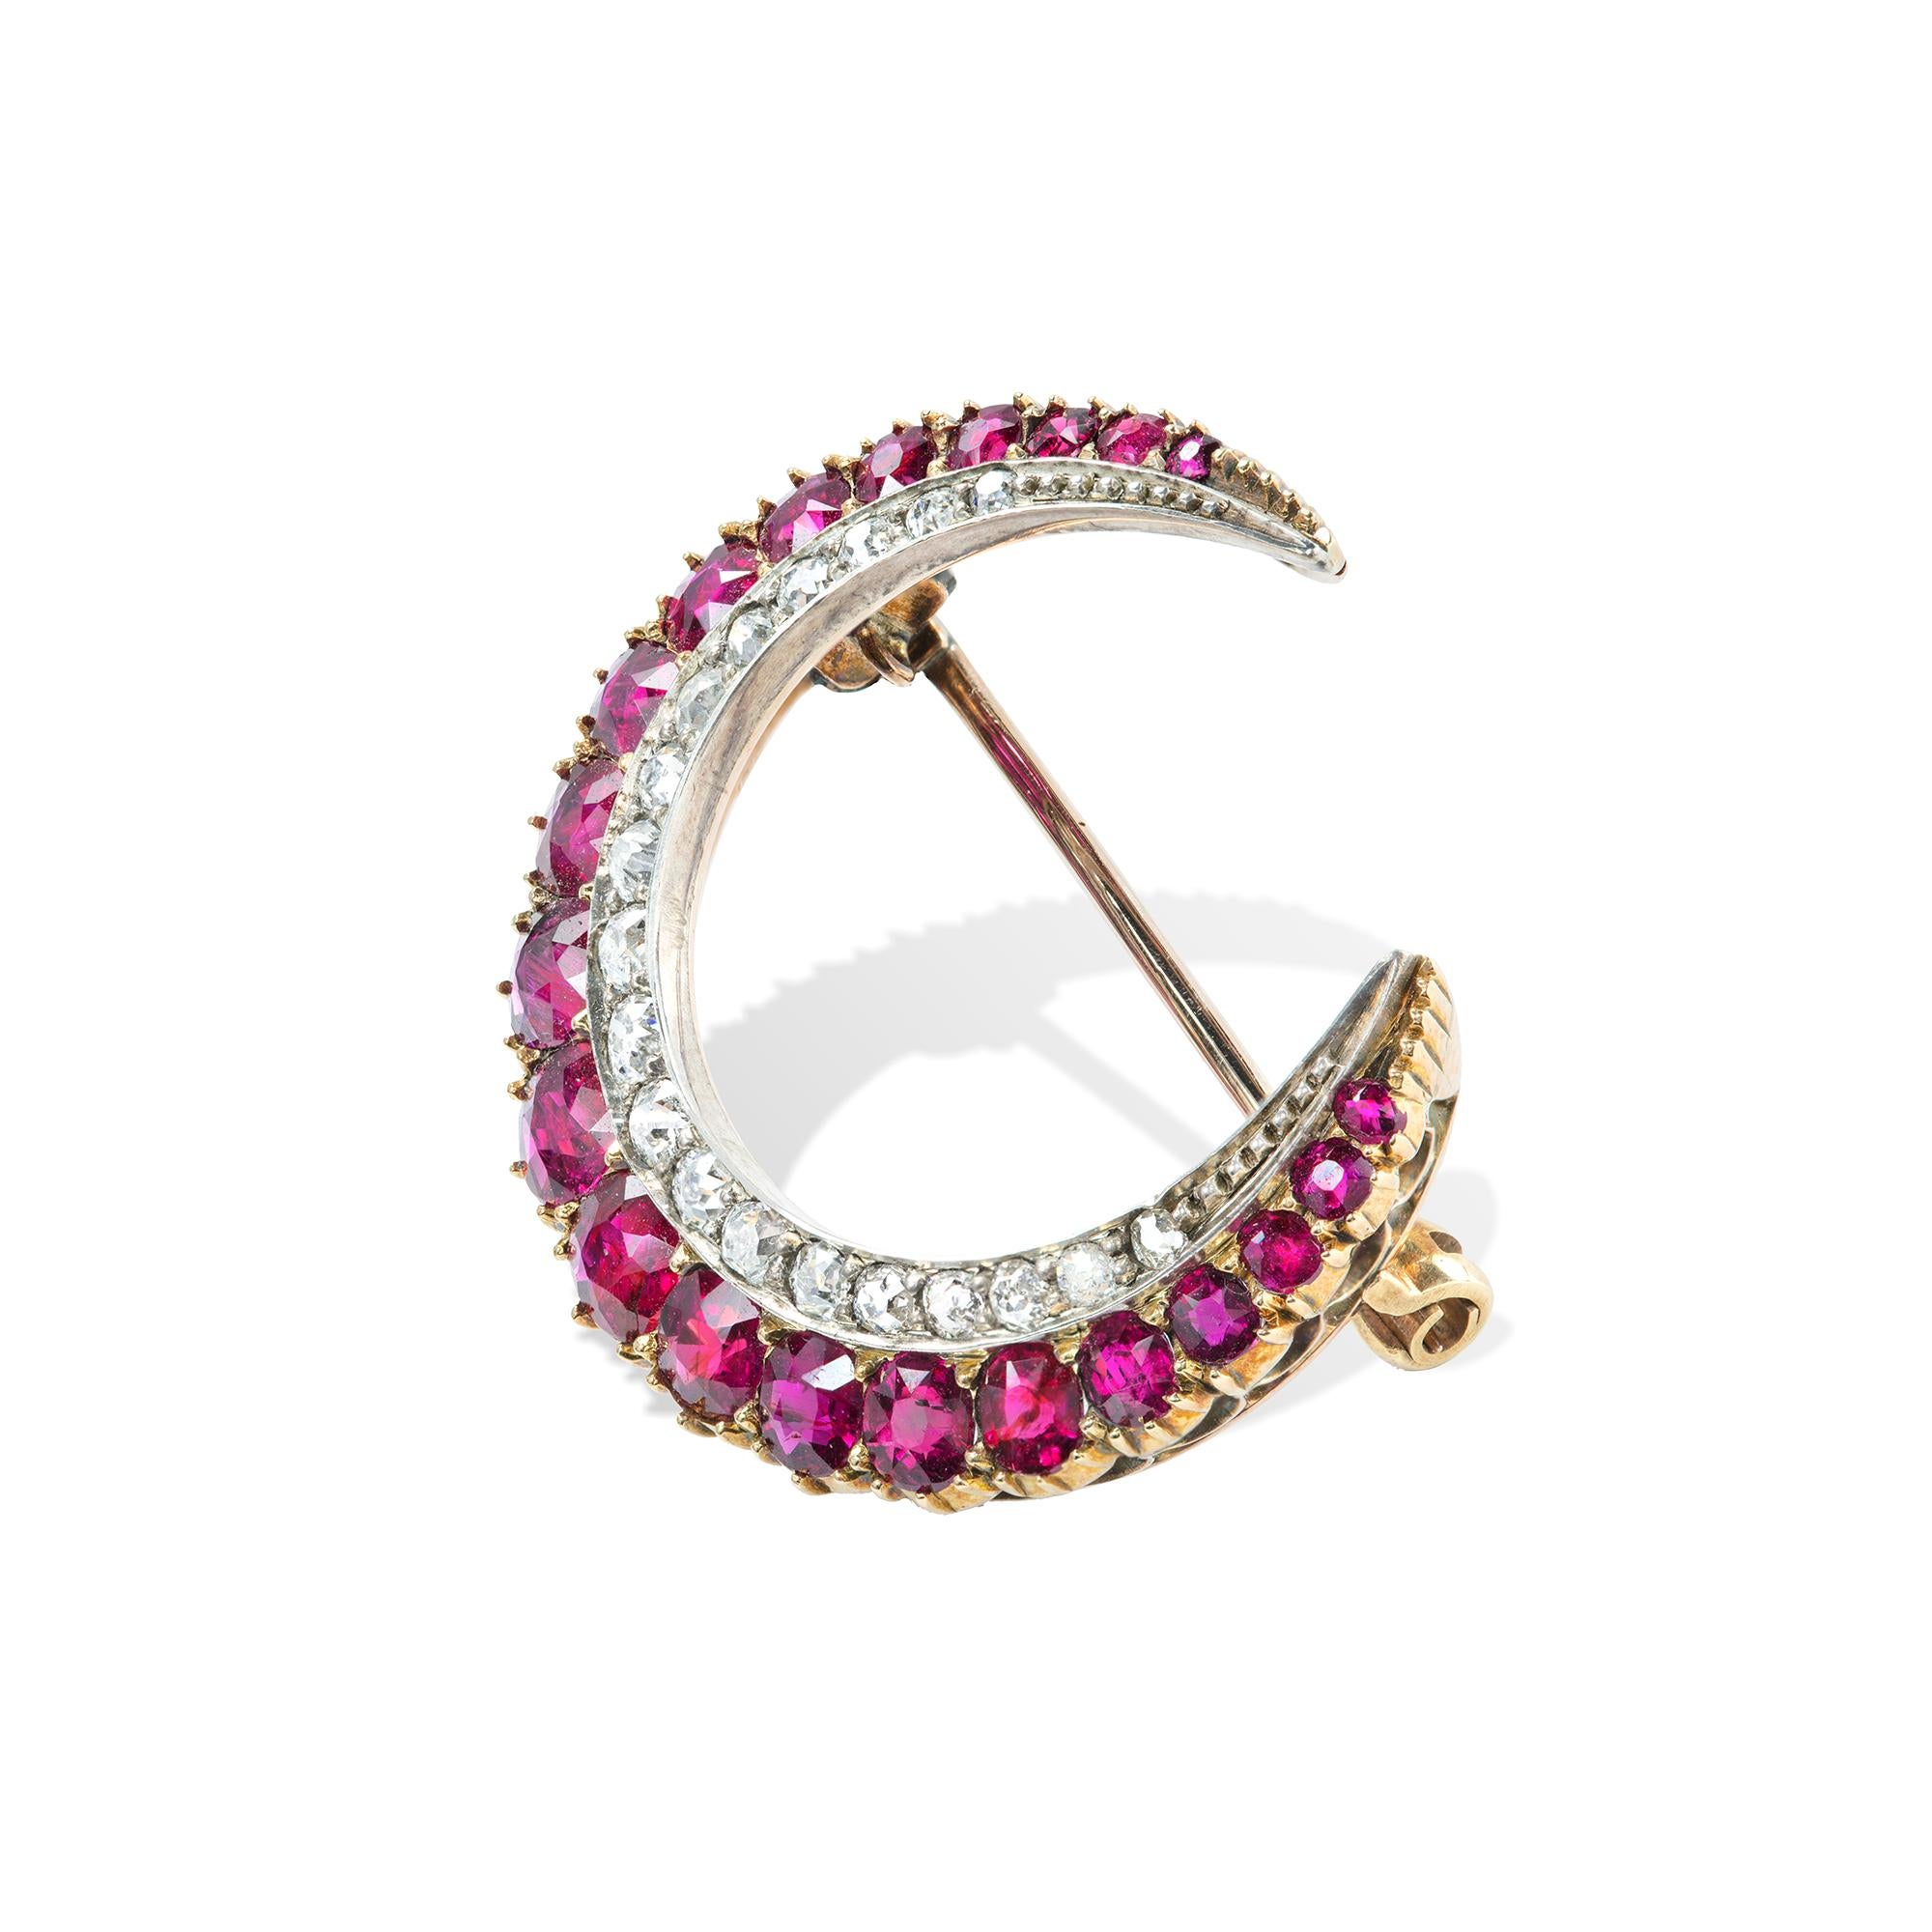 A late Victorian ruby and diamond crescent brooch, with one row of graduating cushion spape rubies estimated to weight 3.8 carats, and a  row of graduating old brilliant-cut diamonds estimated to weigh 0.65 carats, claw set in silver, all on gold